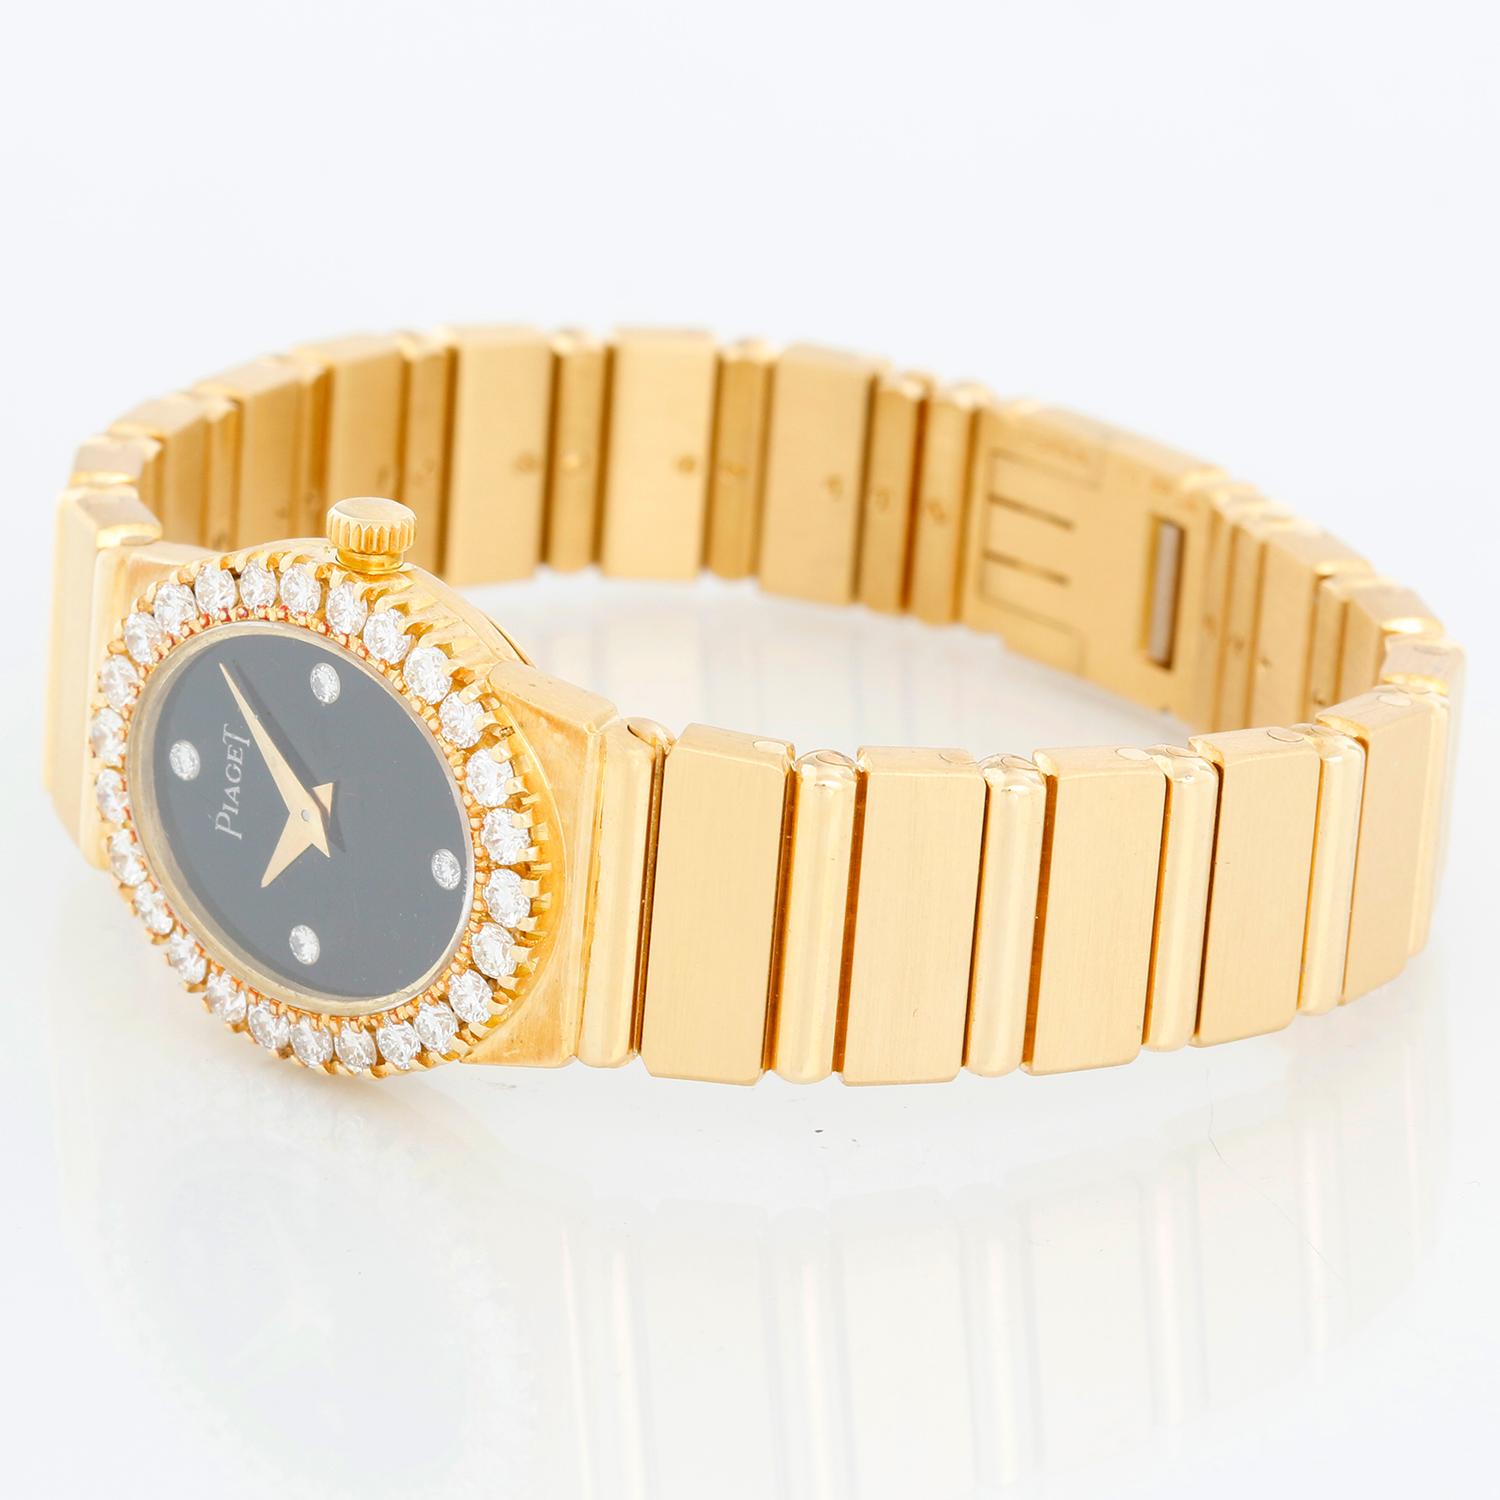 Ladies Piaget Polo 18K Yellow Gold  Watch - Quartz. 18k yellow gold case with  Piaget Diamond  bezel ( 19mm ). Black Onyx  dial with diamond hour markers. 18k yellow gold bracelet with deployant clasp; will fit a 5 3/4 inch wrist . Pre-owned with